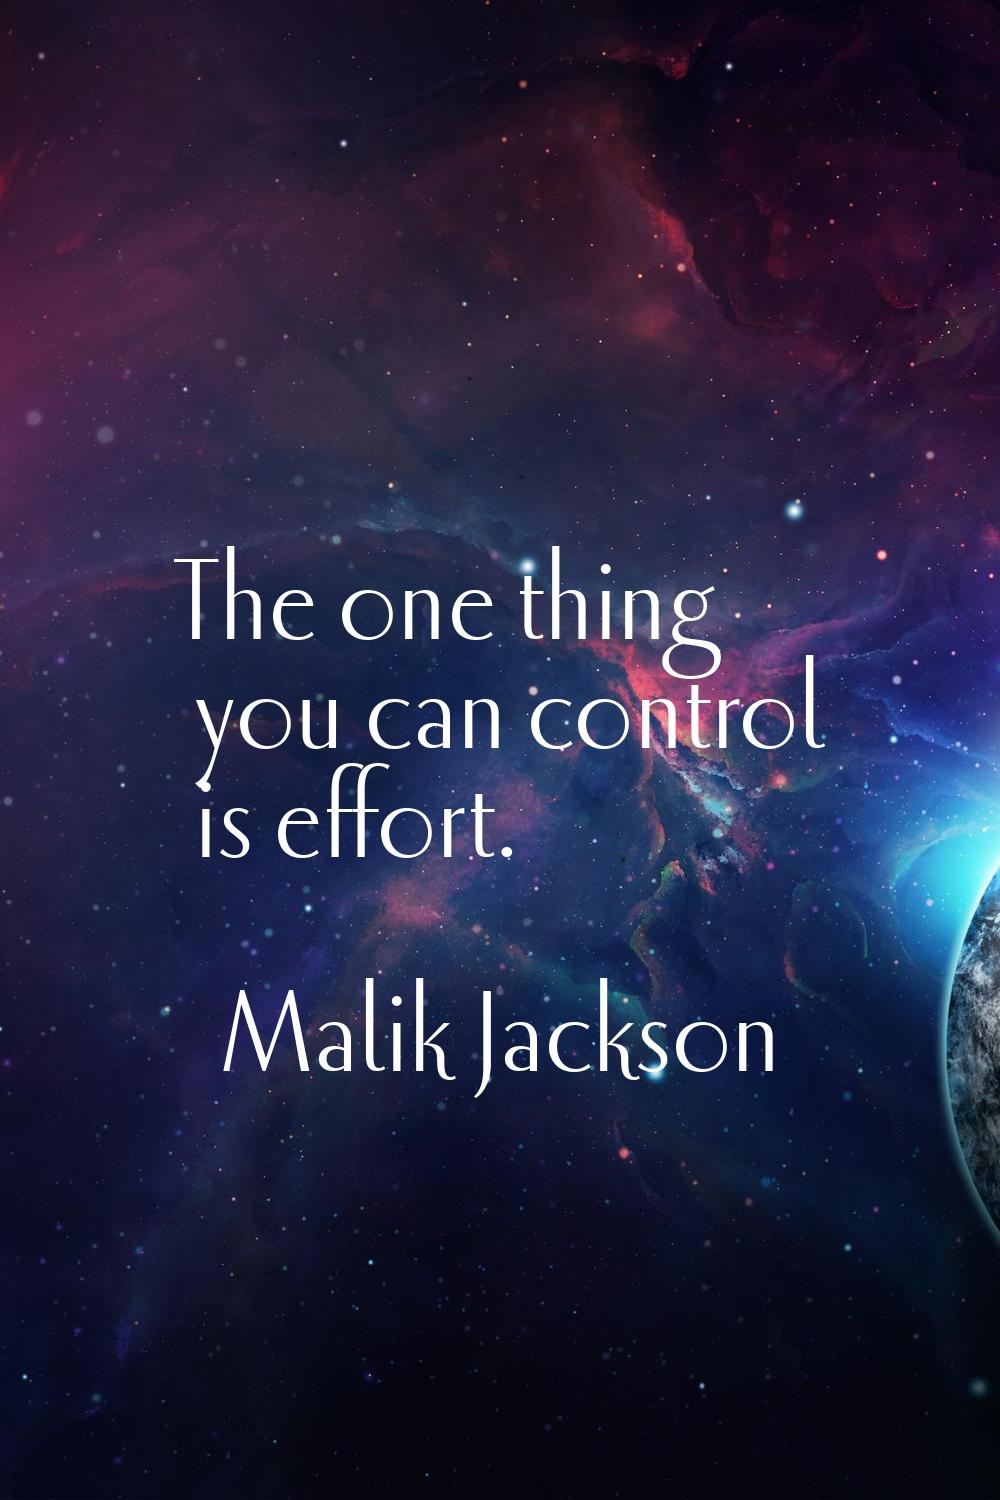 The one thing you can control is effort.